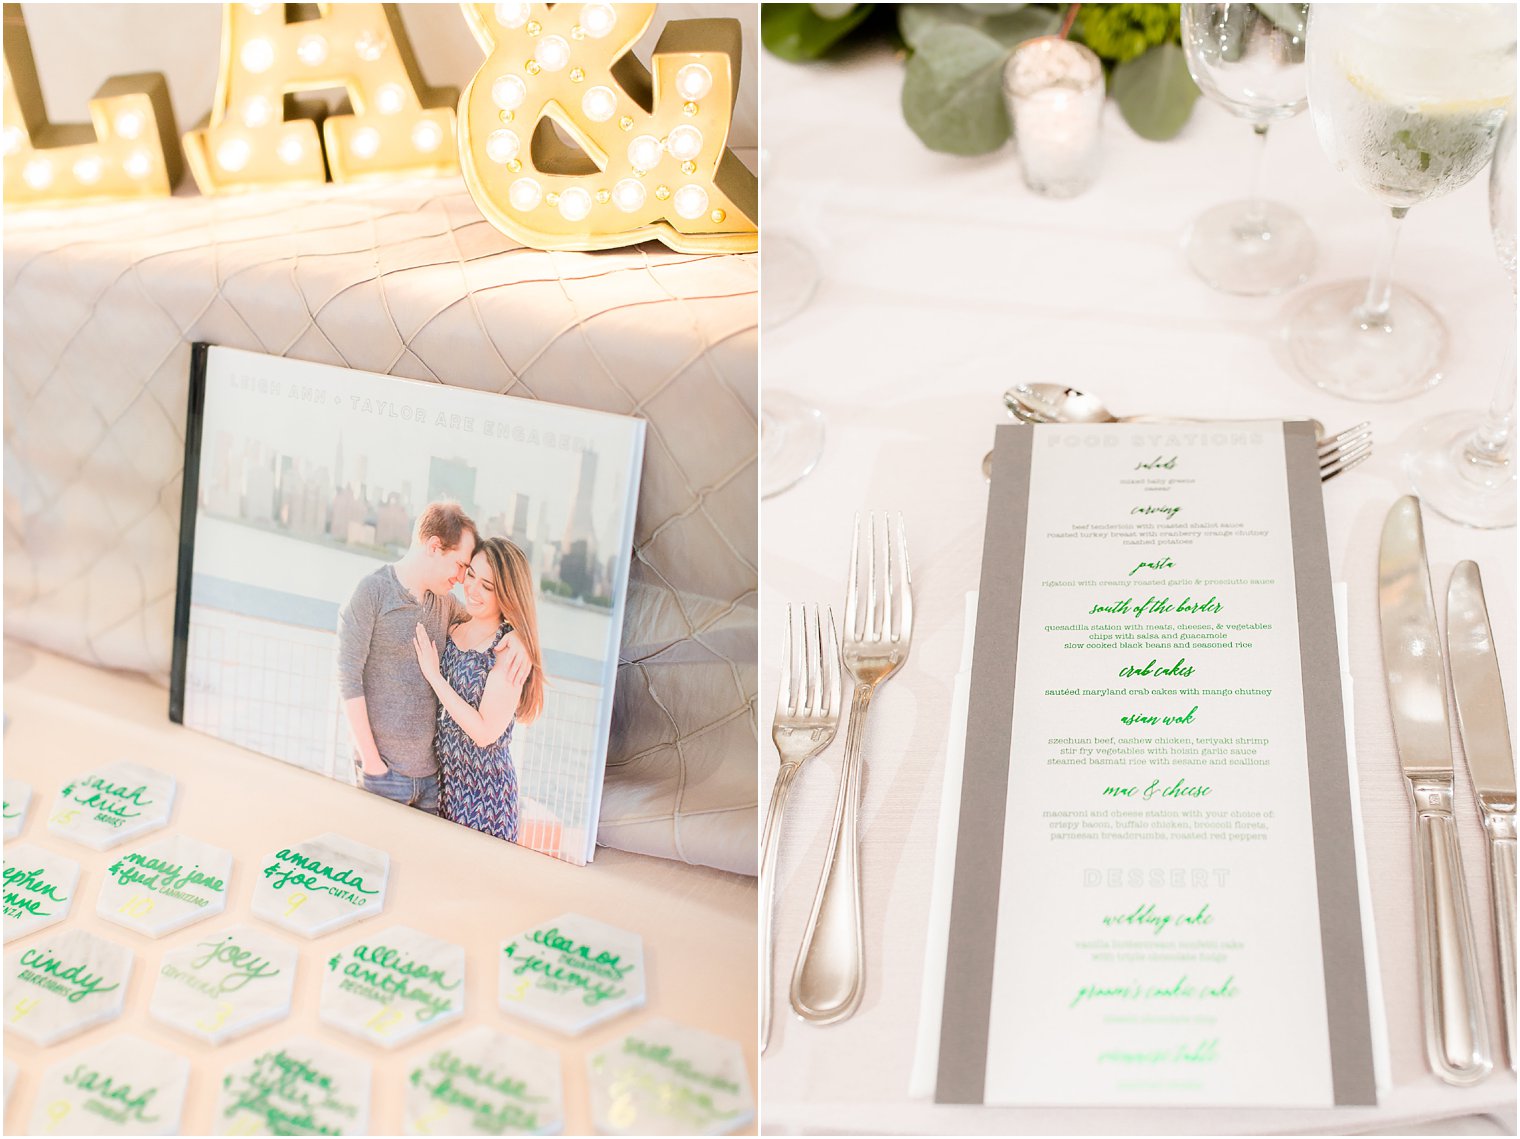 Reception details for a green and peach wedding